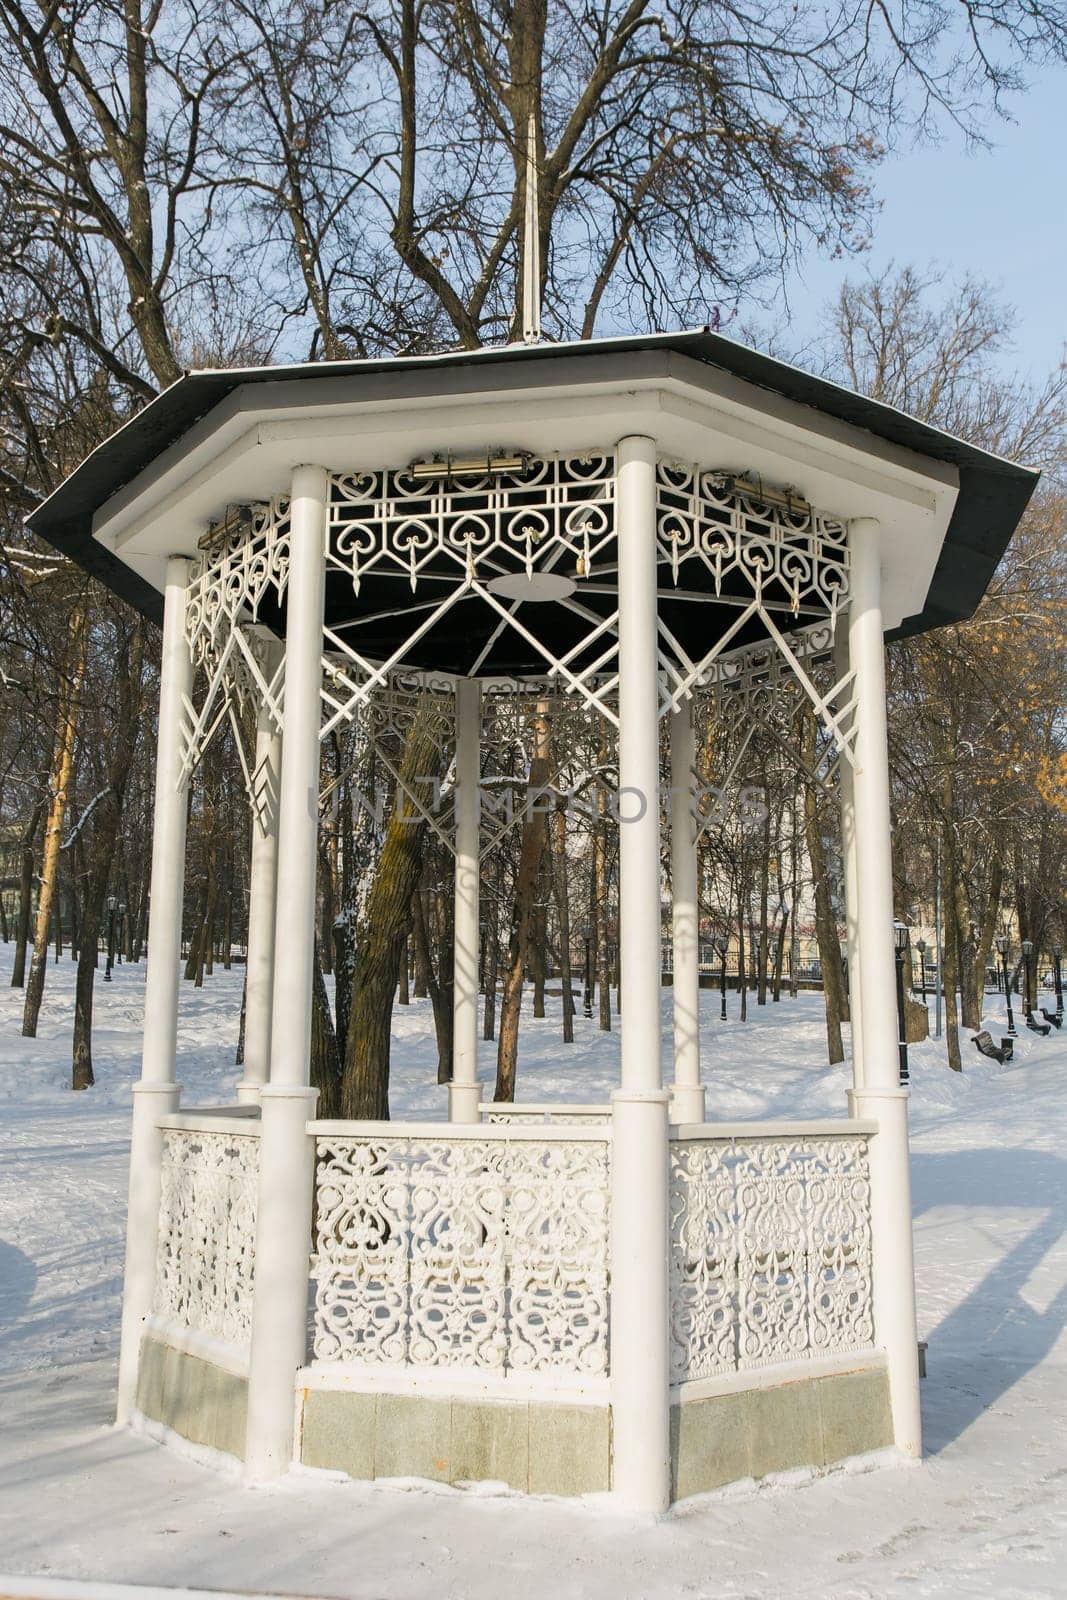 Beautiful white gazebo in a winter park against the backdrop of snowy trees. Park in city. by Satura86